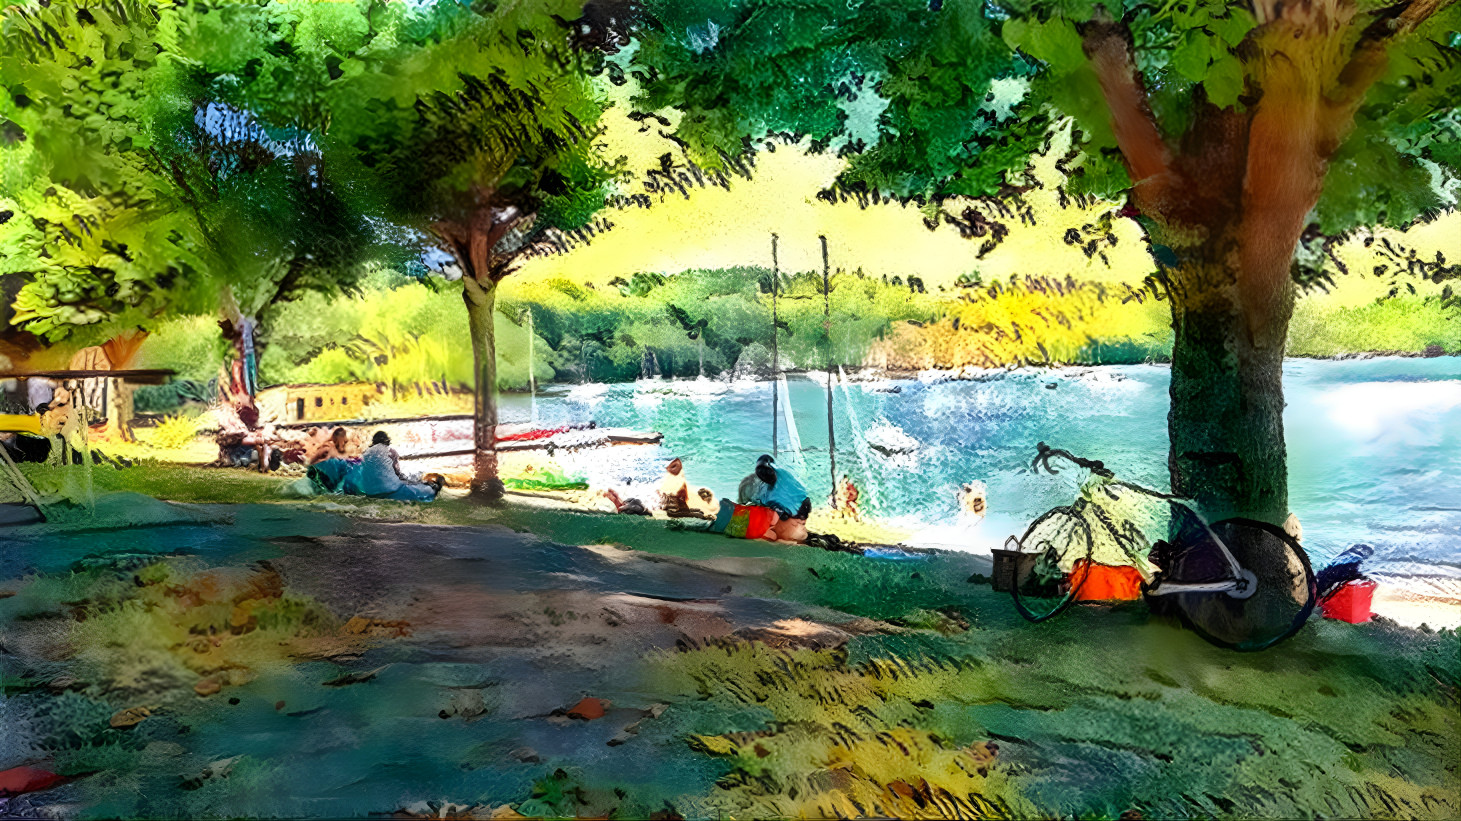 "A Summer Afternoon at the Lakeside" - by Unreal.